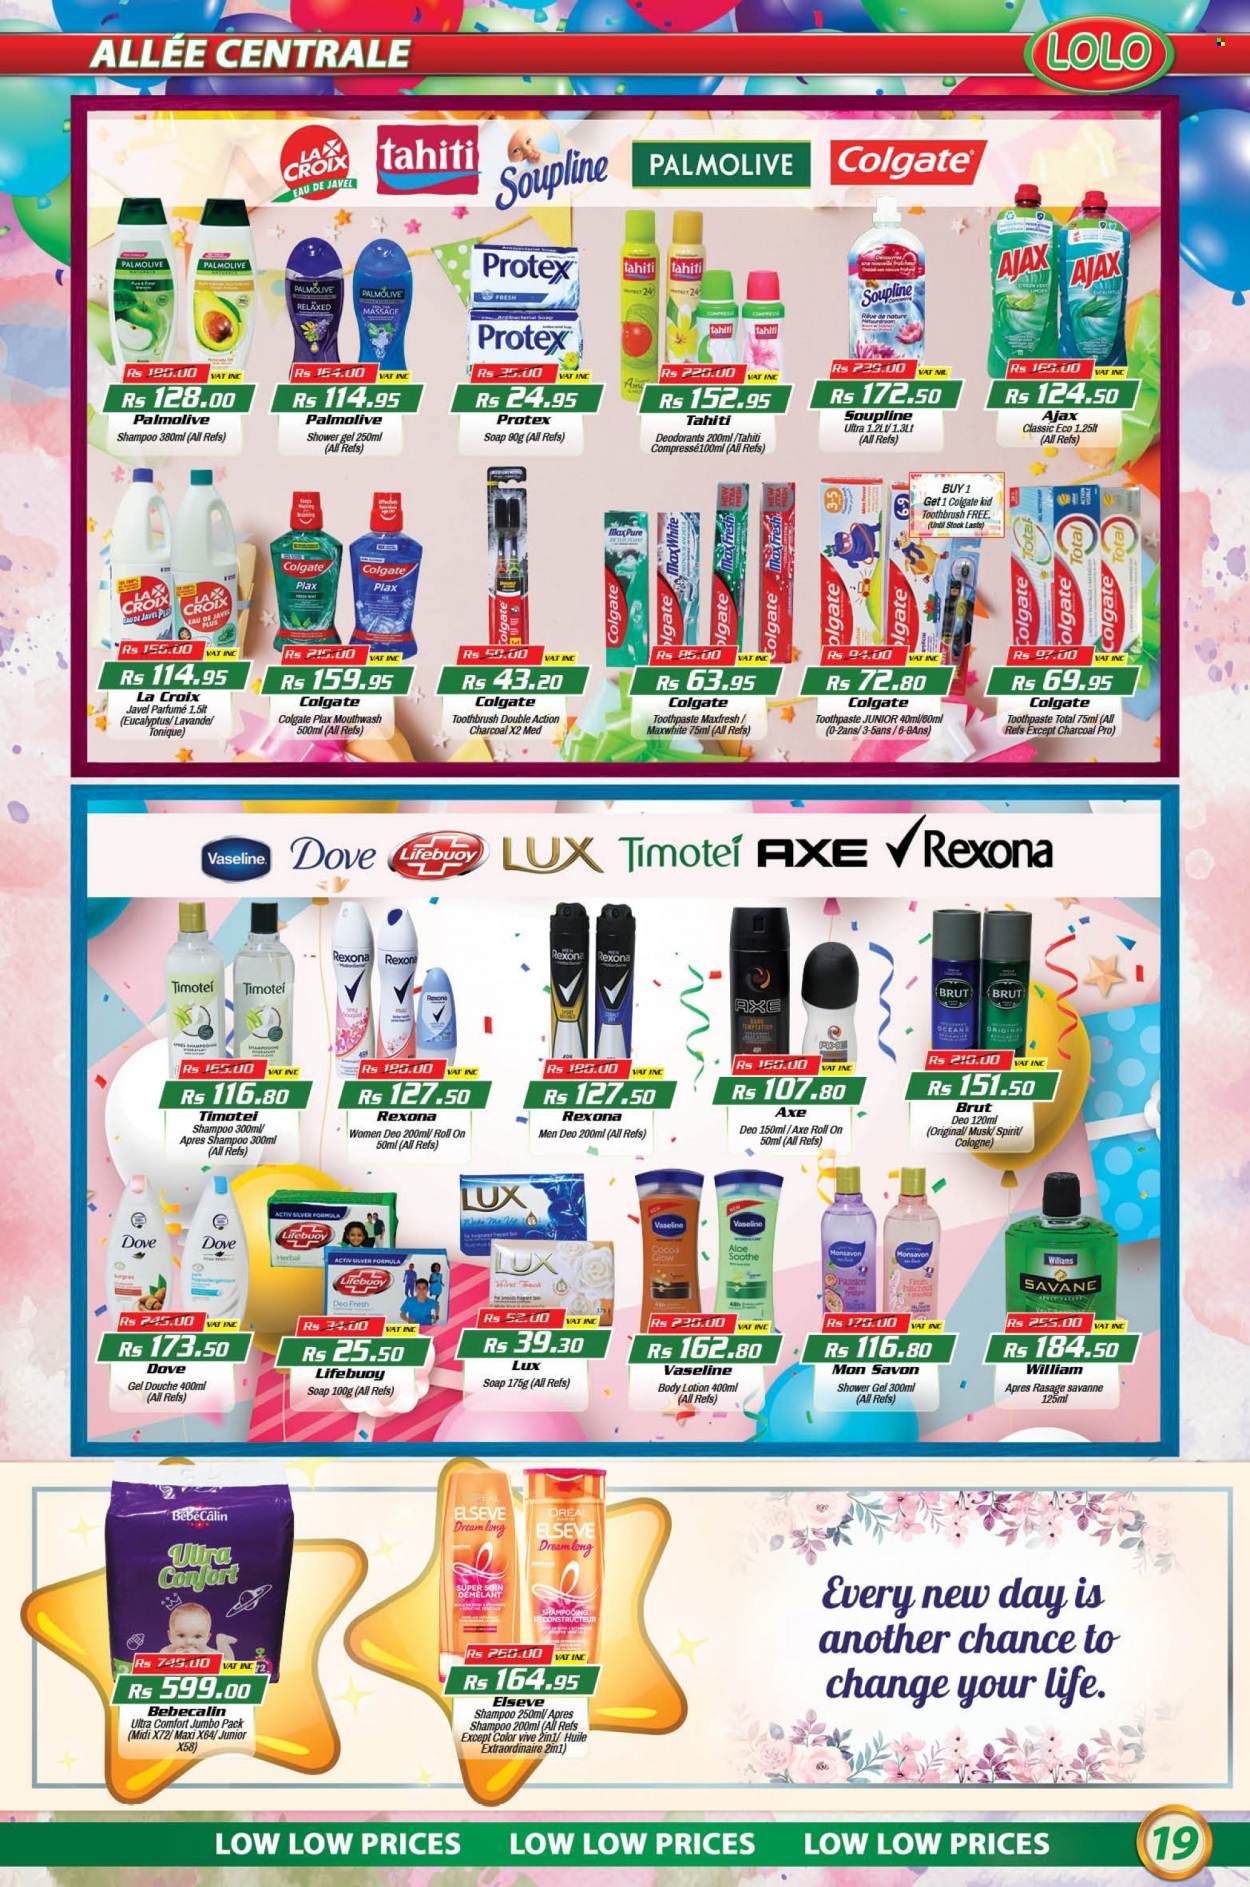 thumbnail - LOLO Hyper Catalogue - 26.07.2022 - 16.08.2022 - Sales products - Dove, Ajax, Lux, shower gel, hand soap, antimicrobial soap, Palmolive, Protex, Vaseline, soap, Lifebuoy, toothbrush, toothpaste, mouthwash, Plax, body lotion, cologne, roll-on, Brut, Axe, bouquet, Colgate, Rexona, shampoo, deodorant. Page 19.